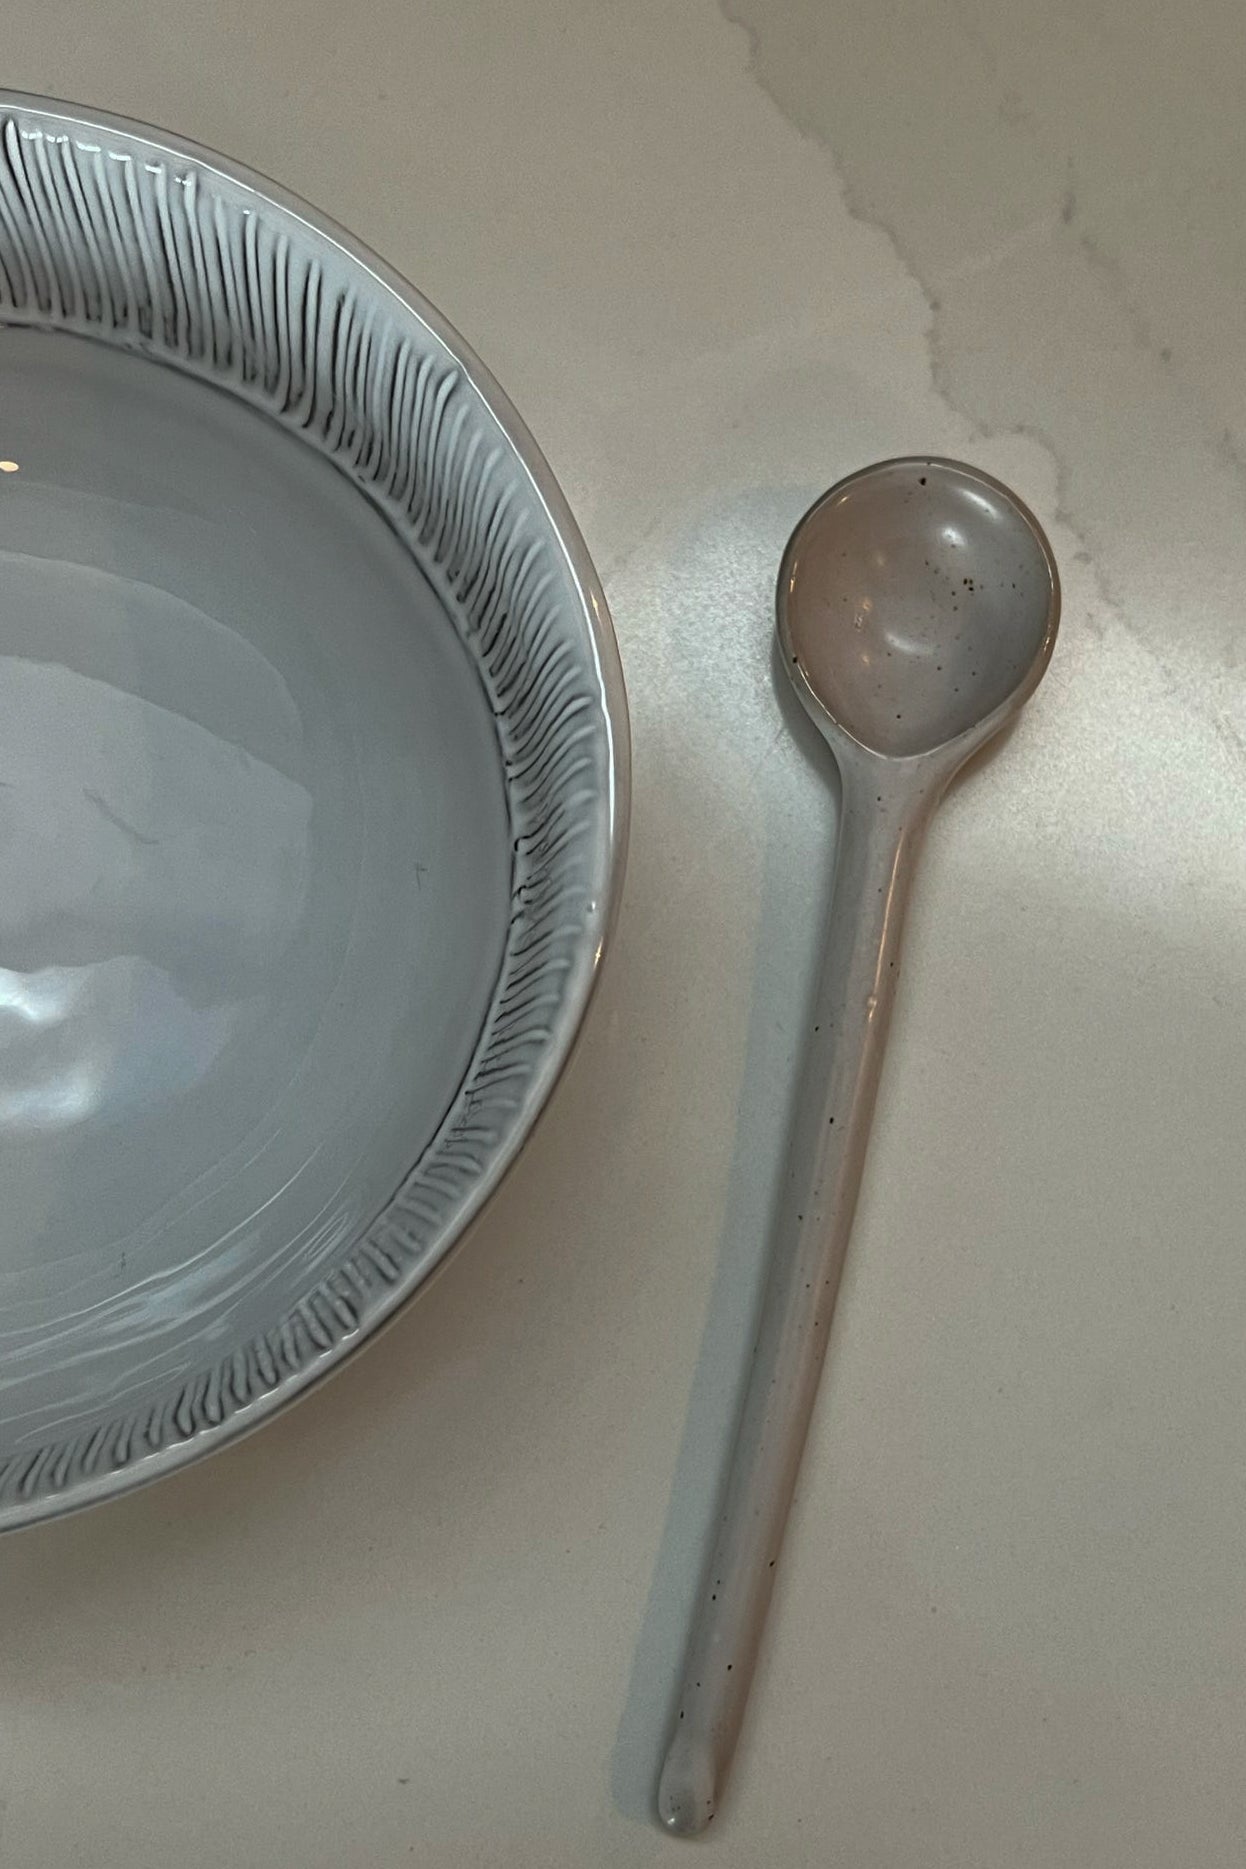 Not Your Average Spoon